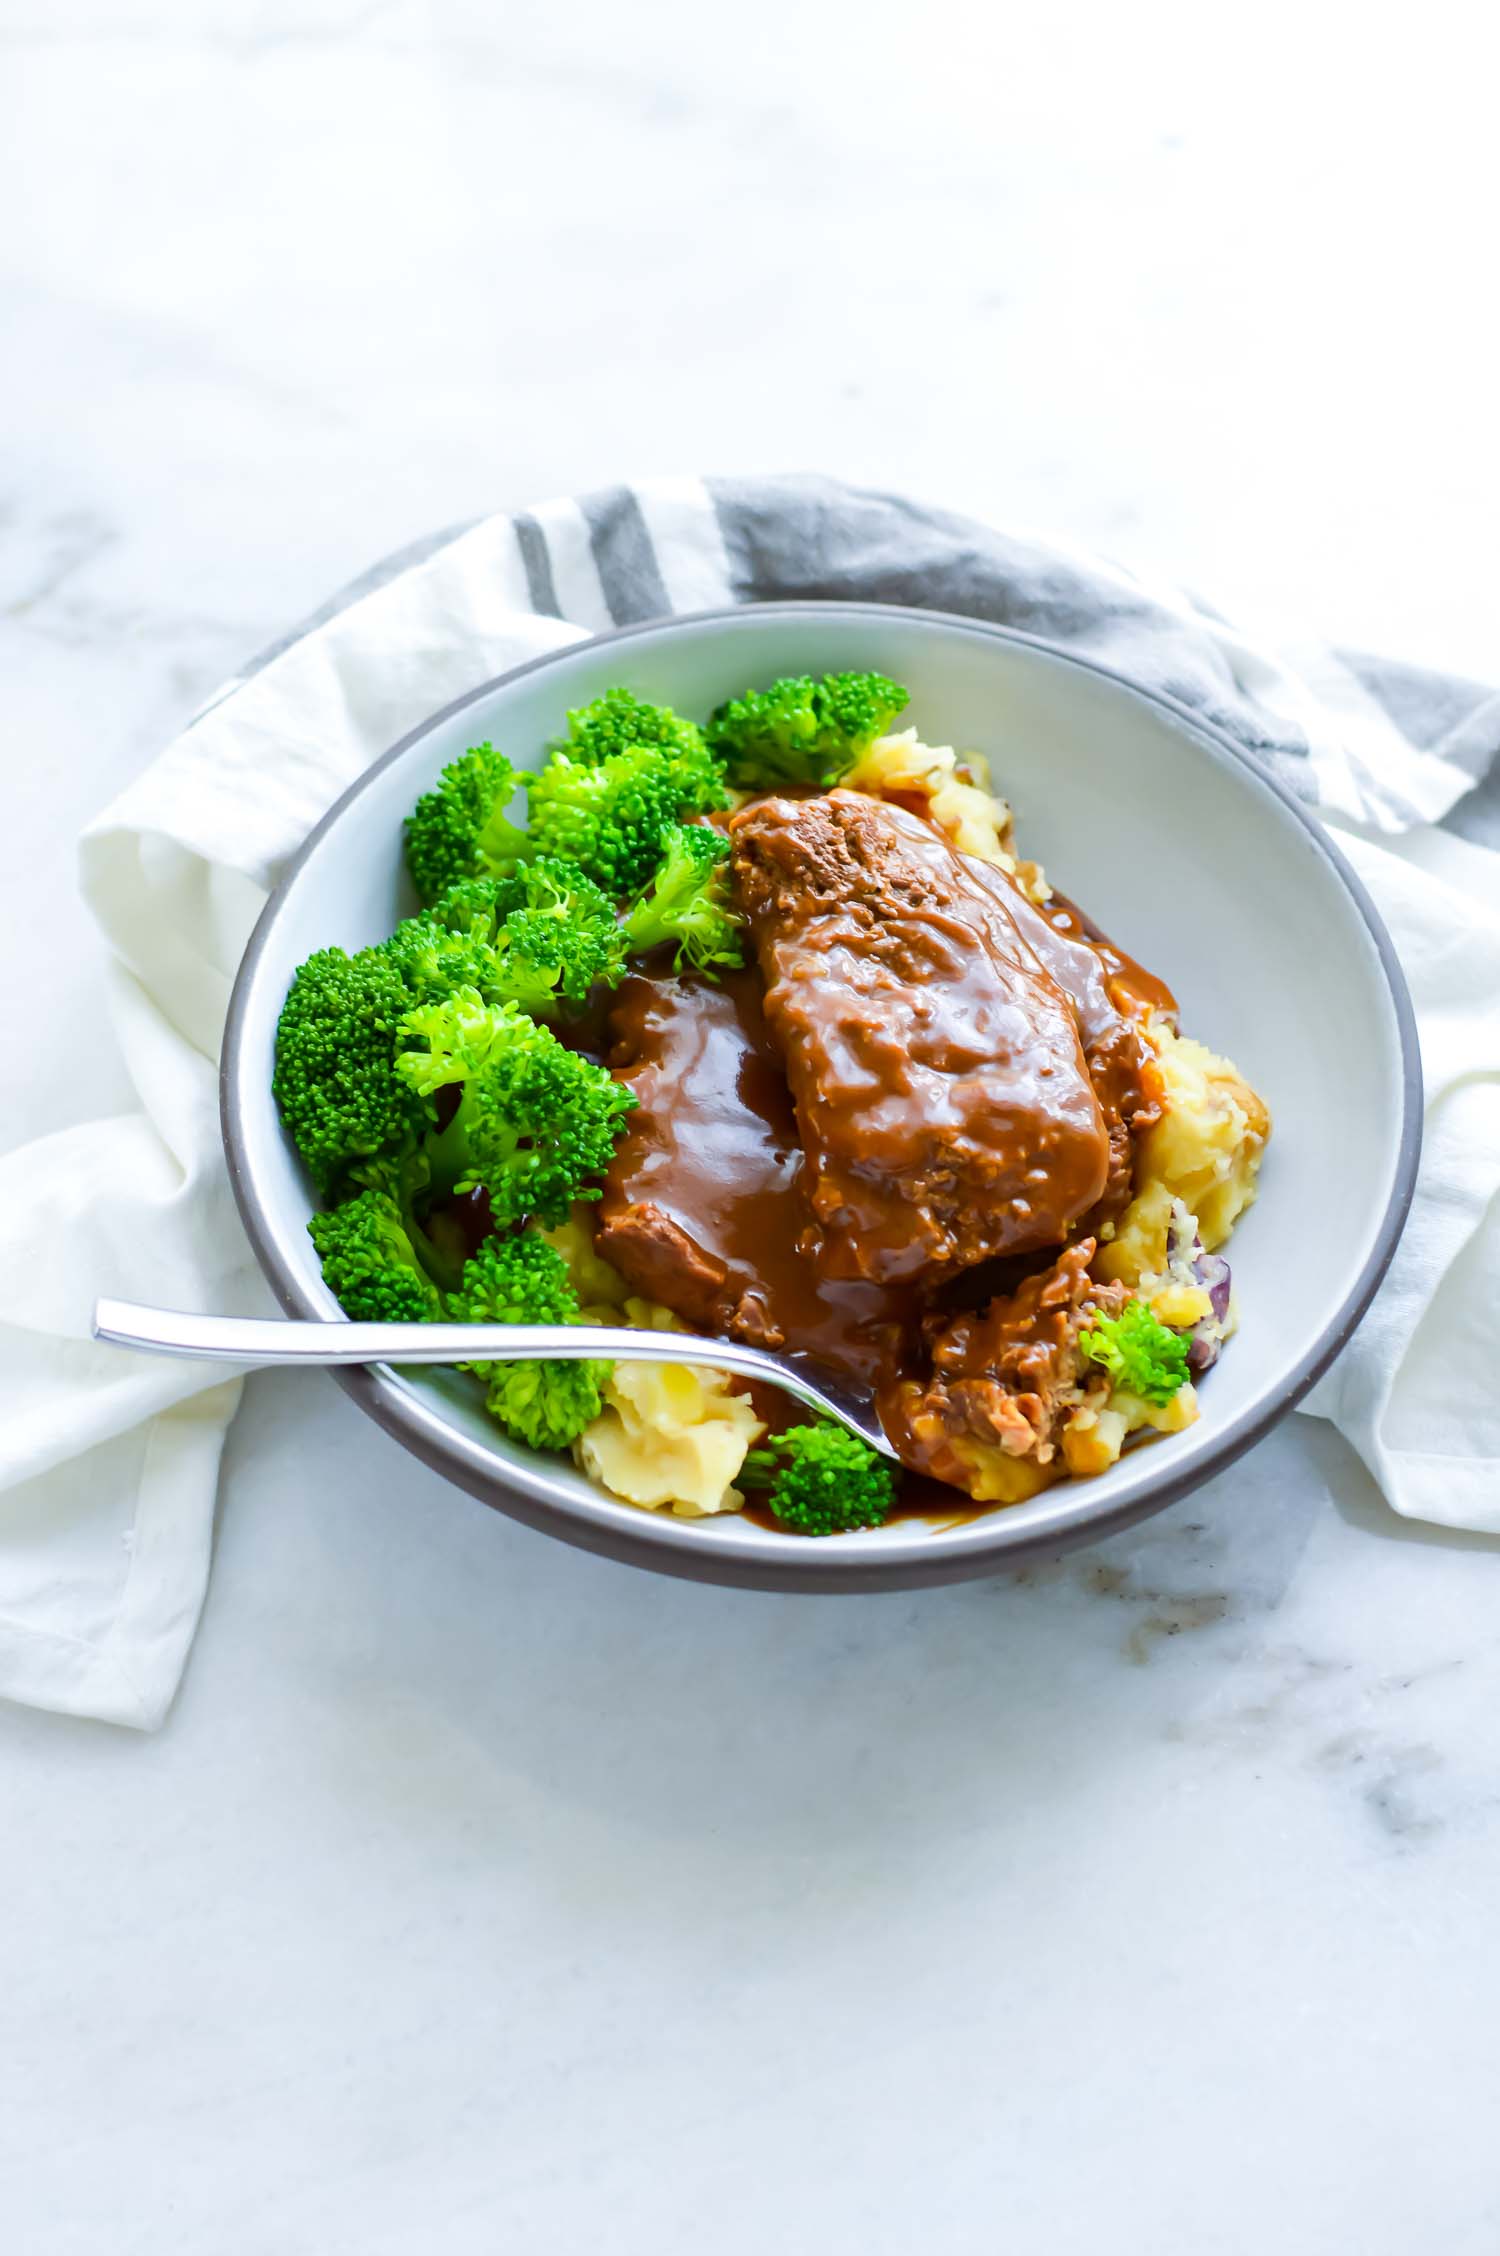 A white bowl with gray rim with cubed steaks with gravy, potato, and broccoli with a fork in it.